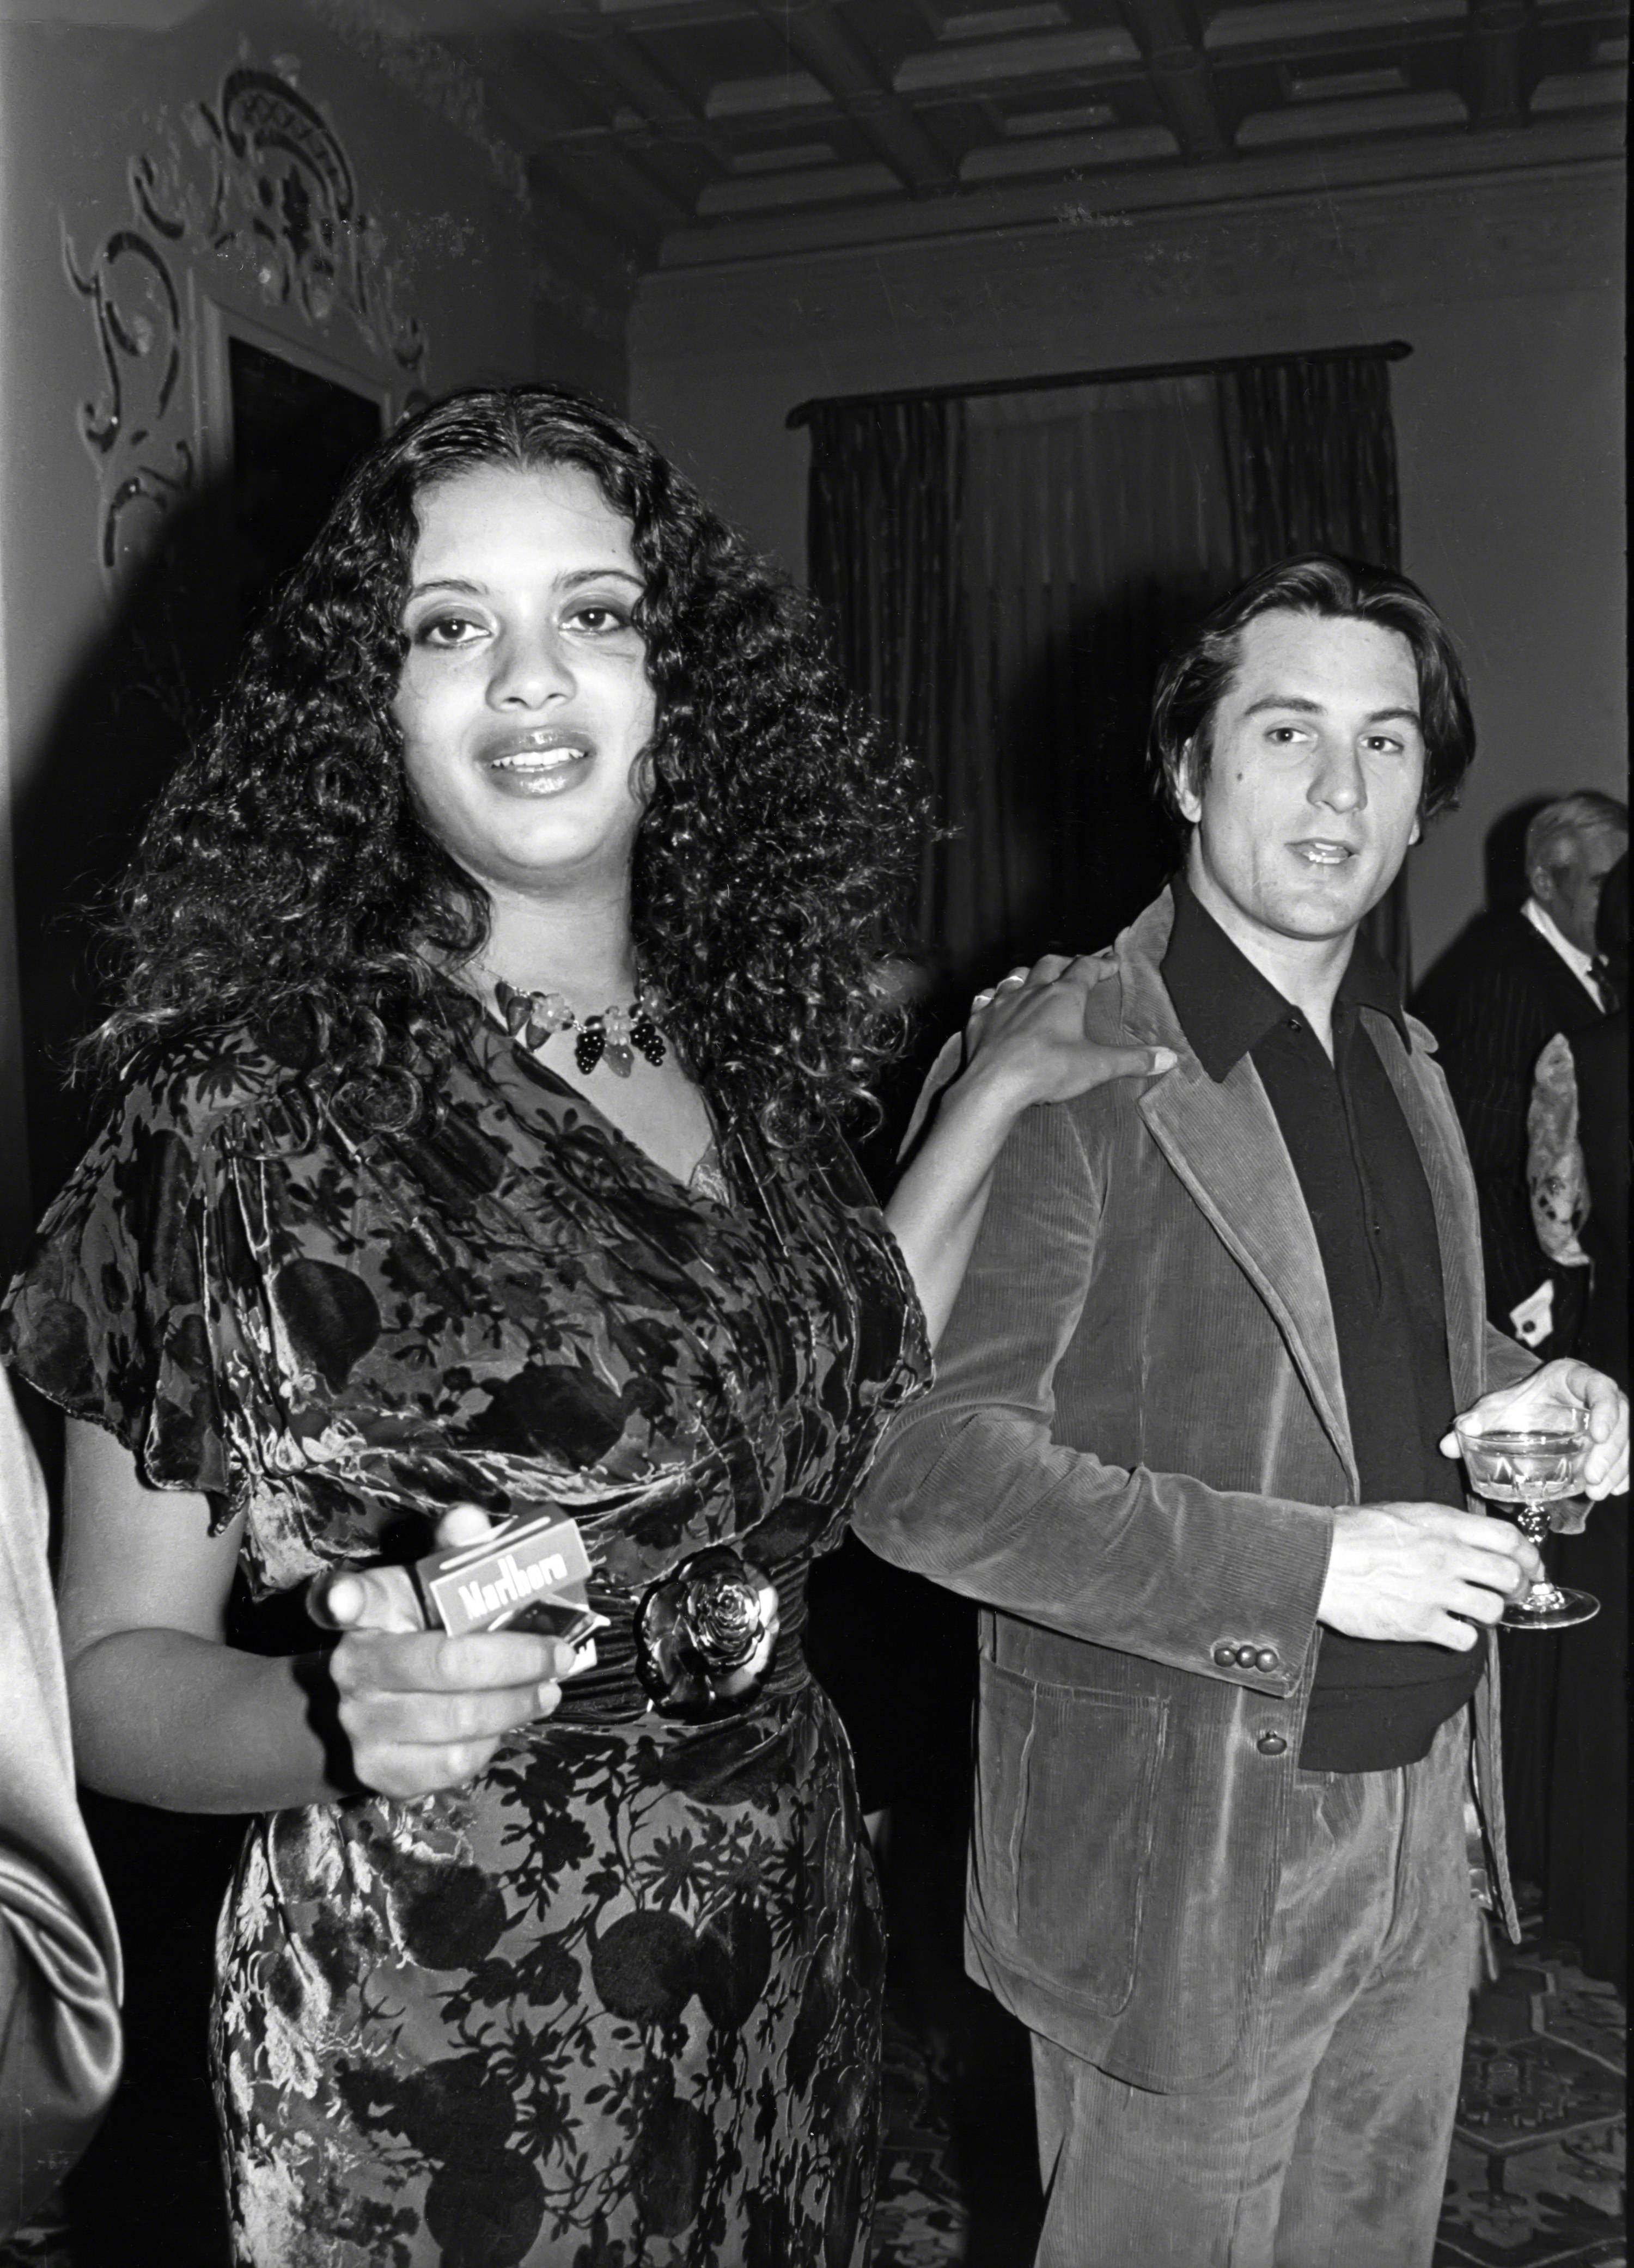 robert and diahnne at a party